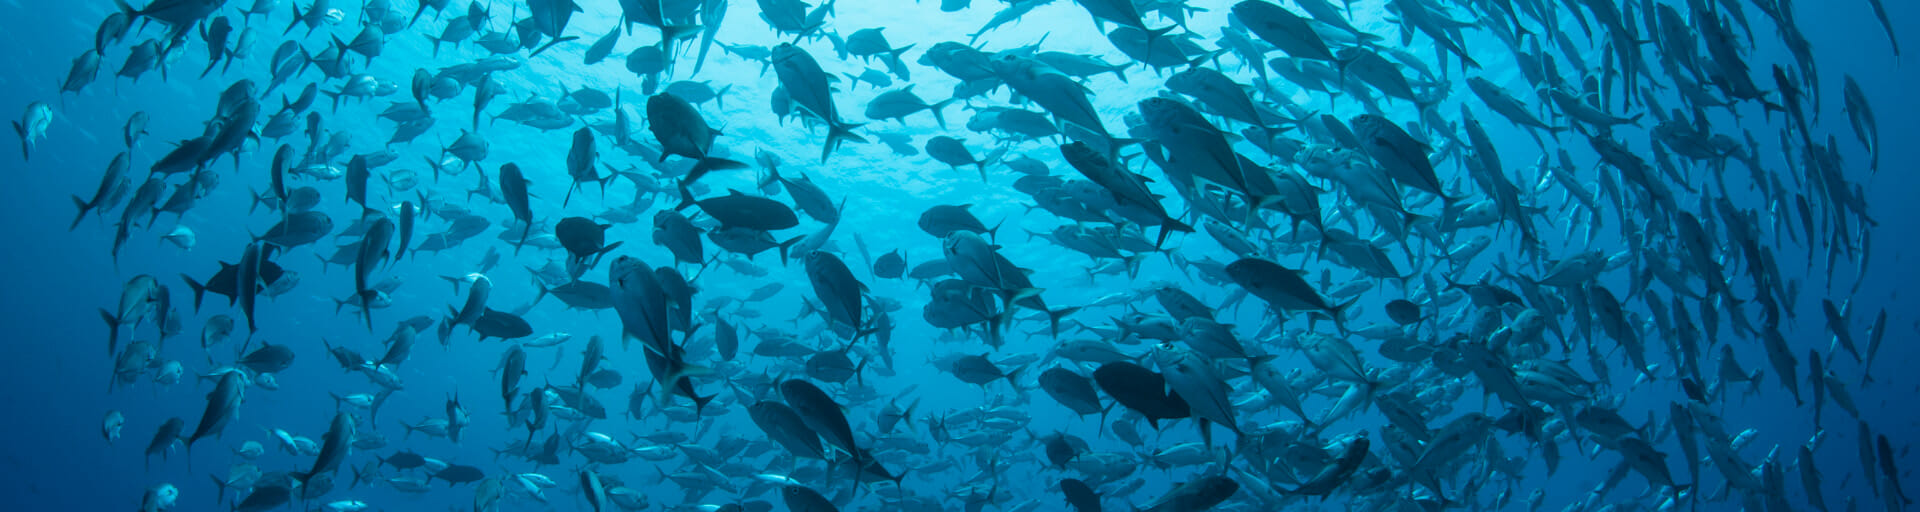 
		An image taken beneath a school of fish swimming in a circle. Sun coming from the ocean’s surface is visible through the crowd of fish.		